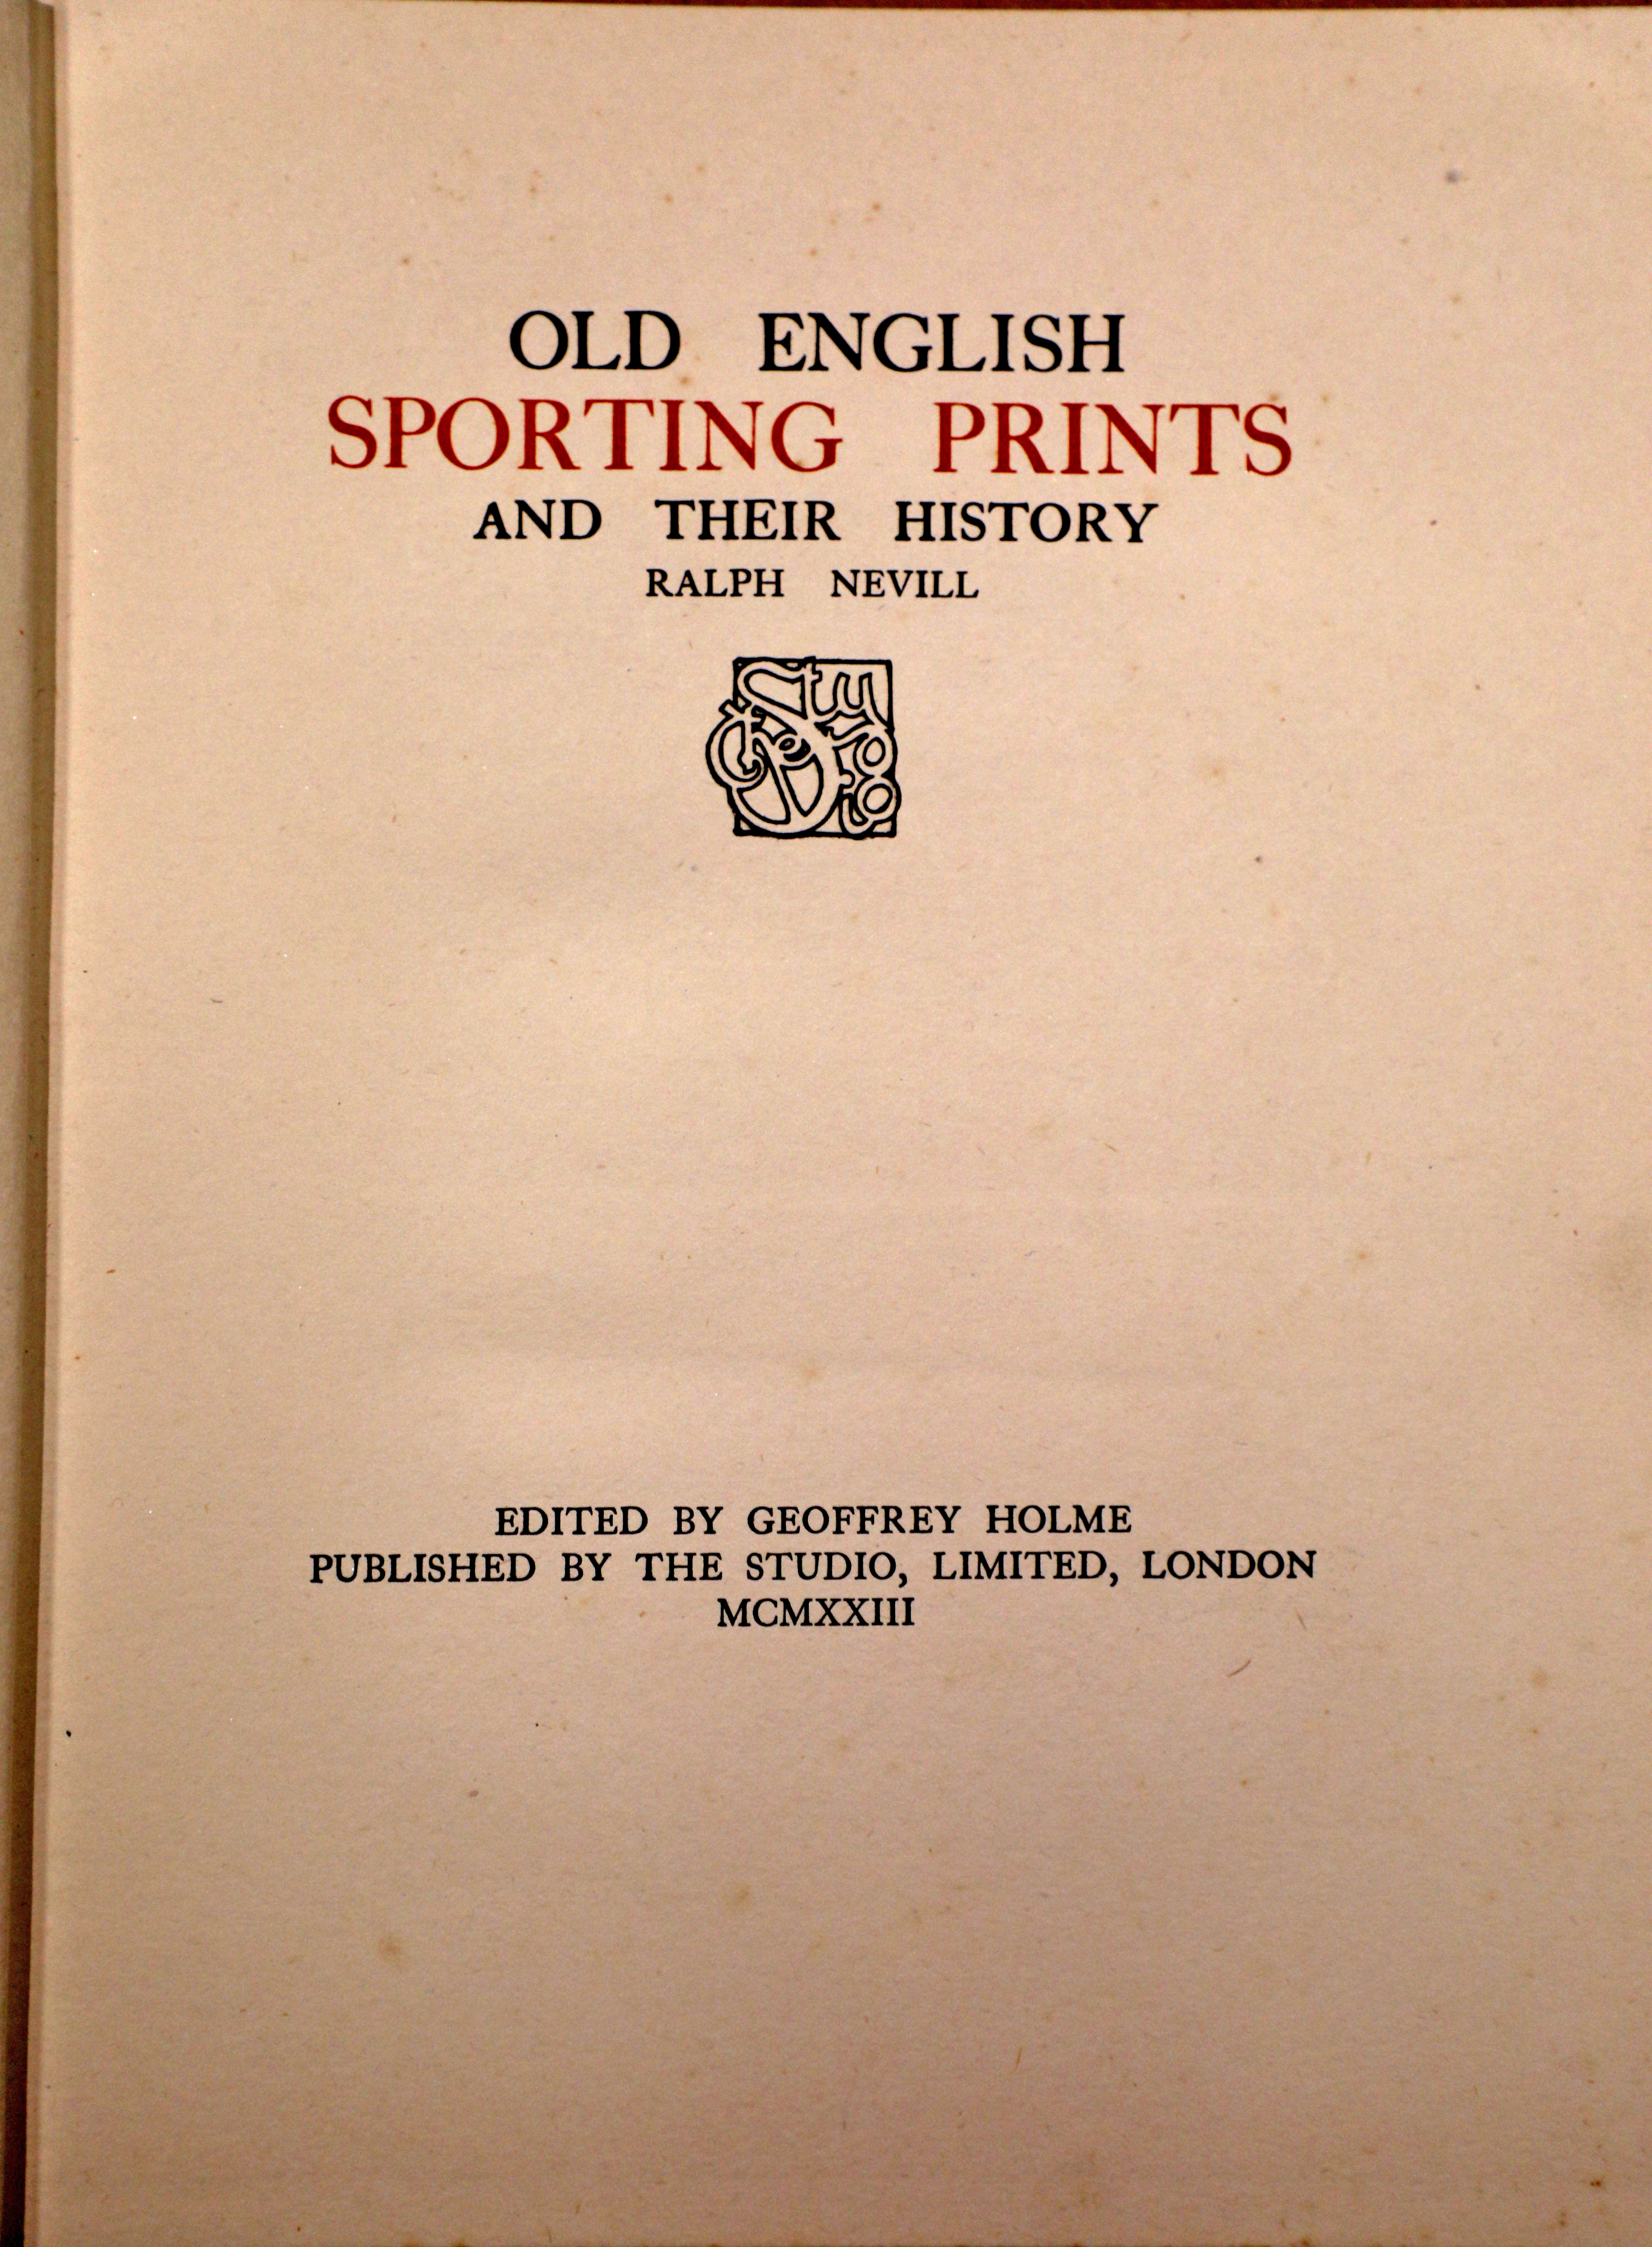 Old English Sporting Prints and their History, Ralph Nevill, 1923, limited edition 1,500 copies (1, - Image 6 of 31